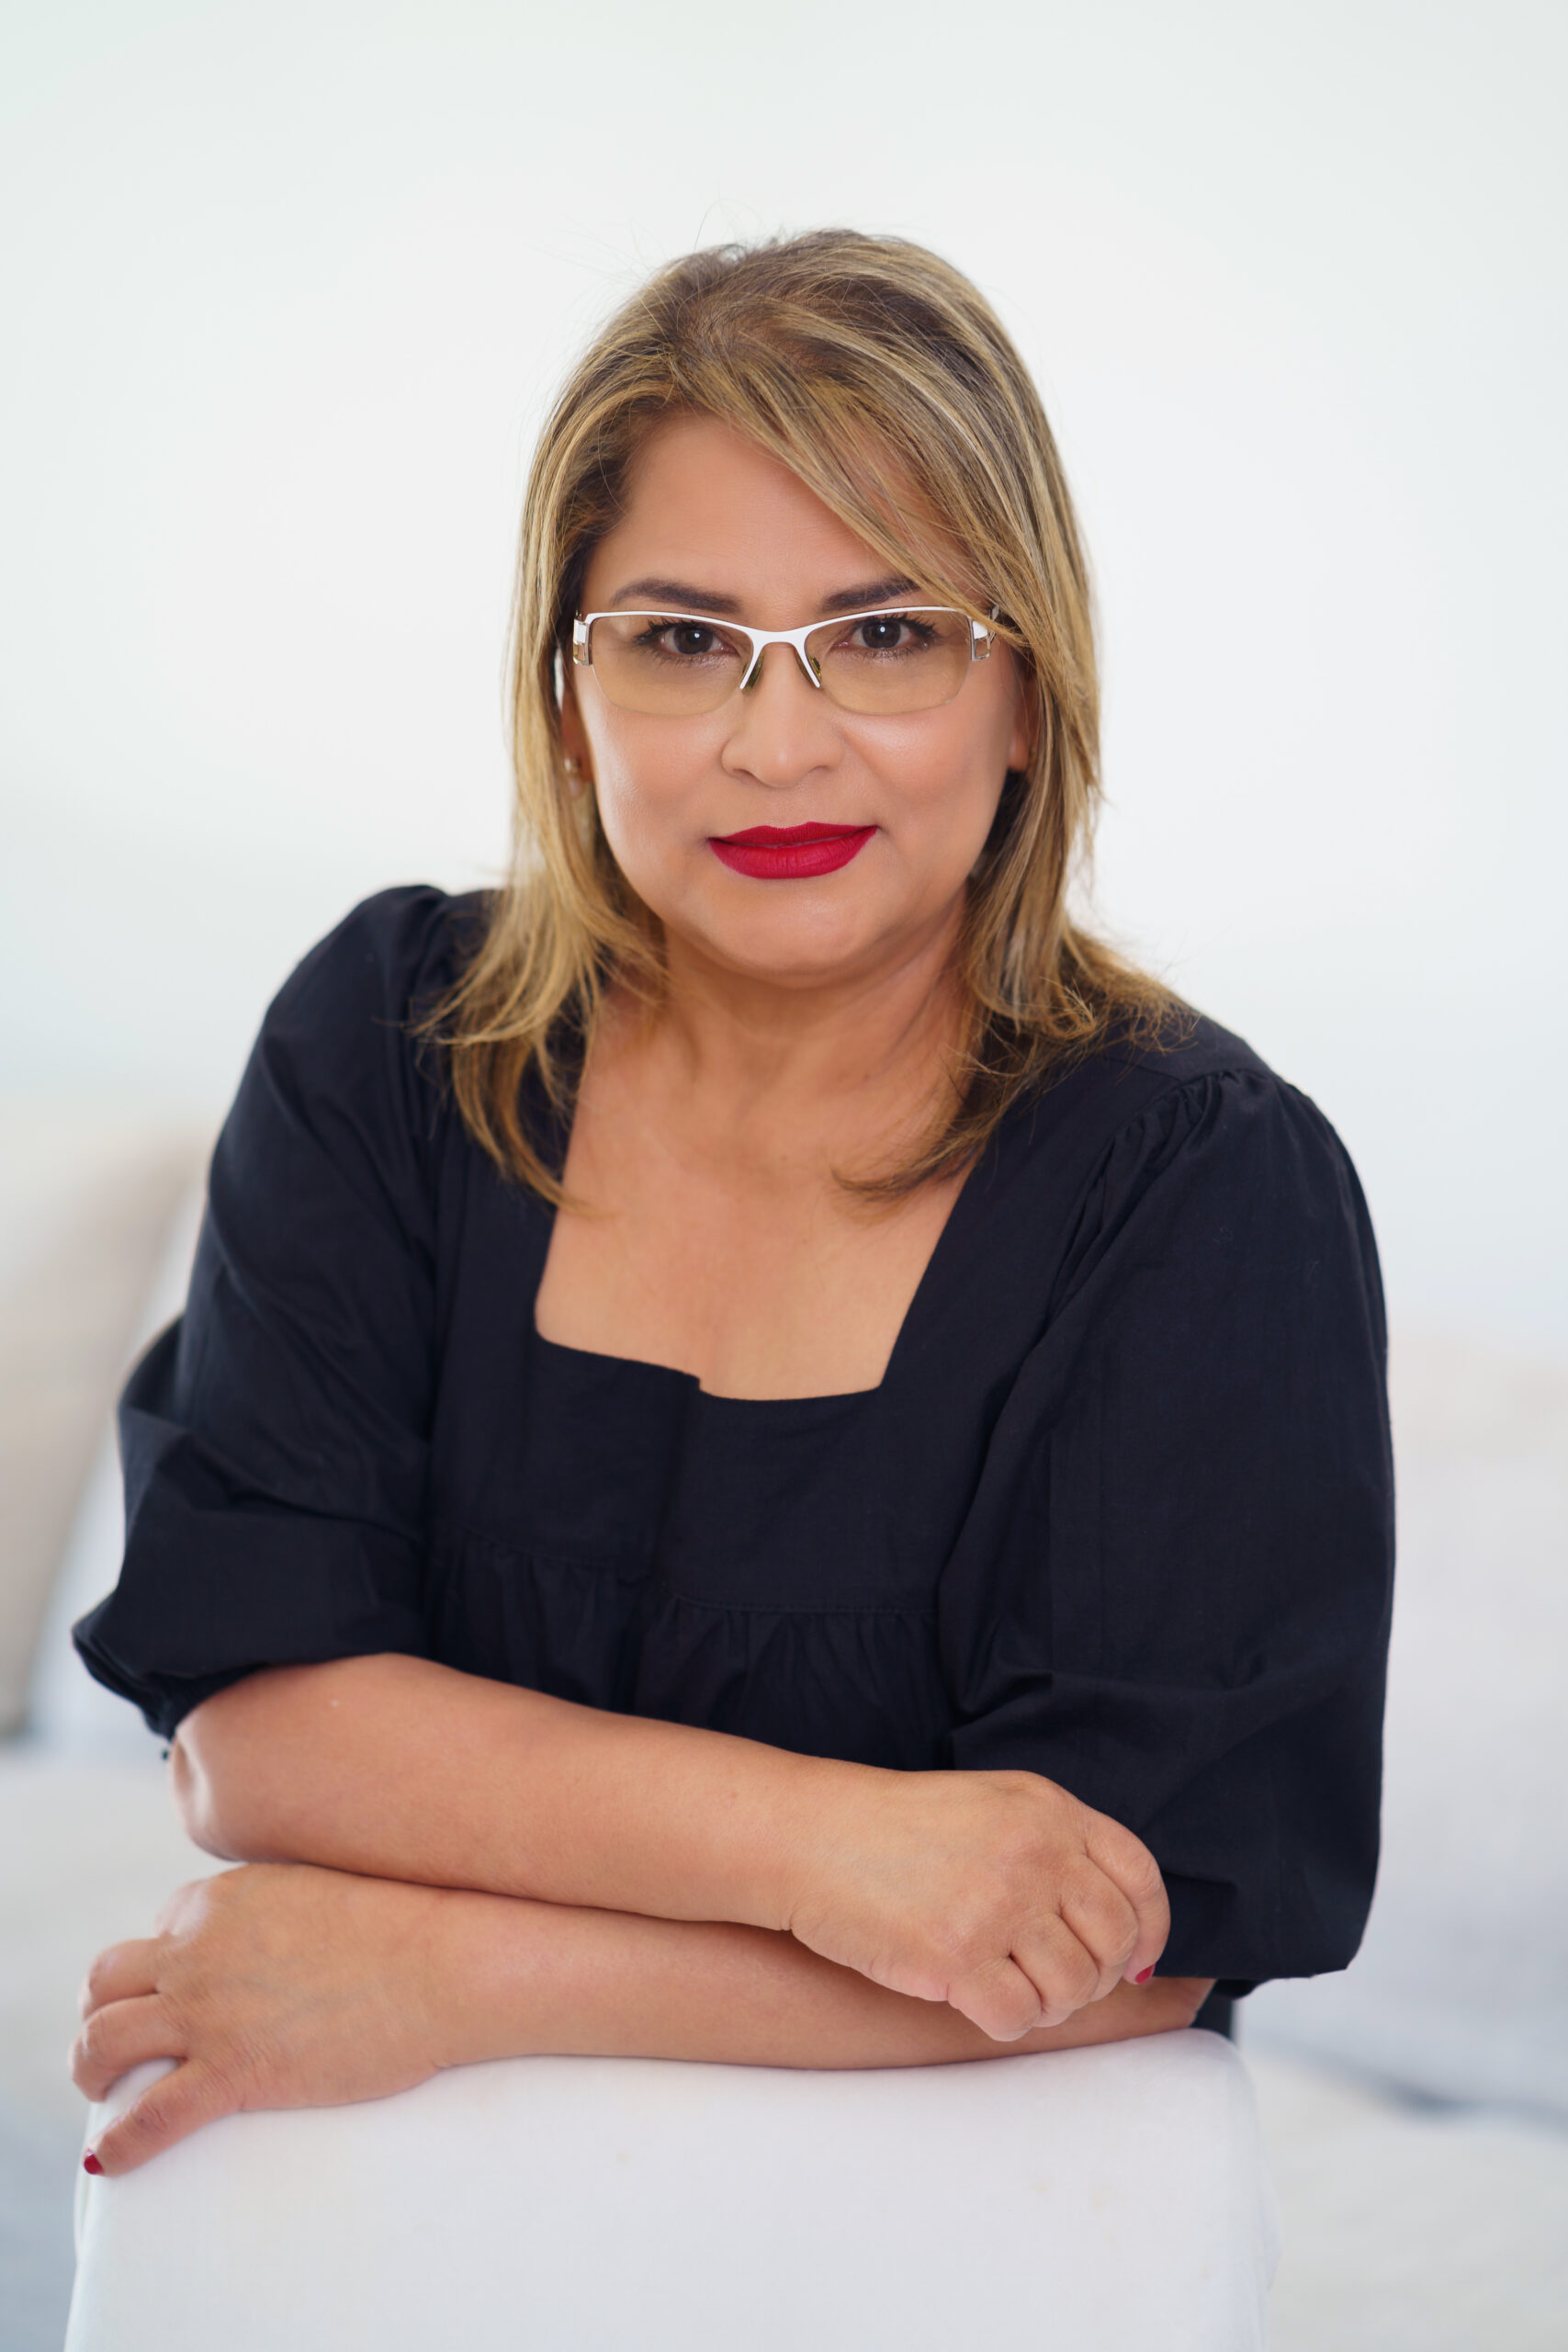 SexyLips is owned and operated by Luzmila Dahlstrom. As a licensed aesthetician for over 20 years, she mainly provided unique facial treatments to enhance the natural beauty found beneath the skin. She rarely wore makeup but soon realized her passion was growing beyond facial treatments and skincare.